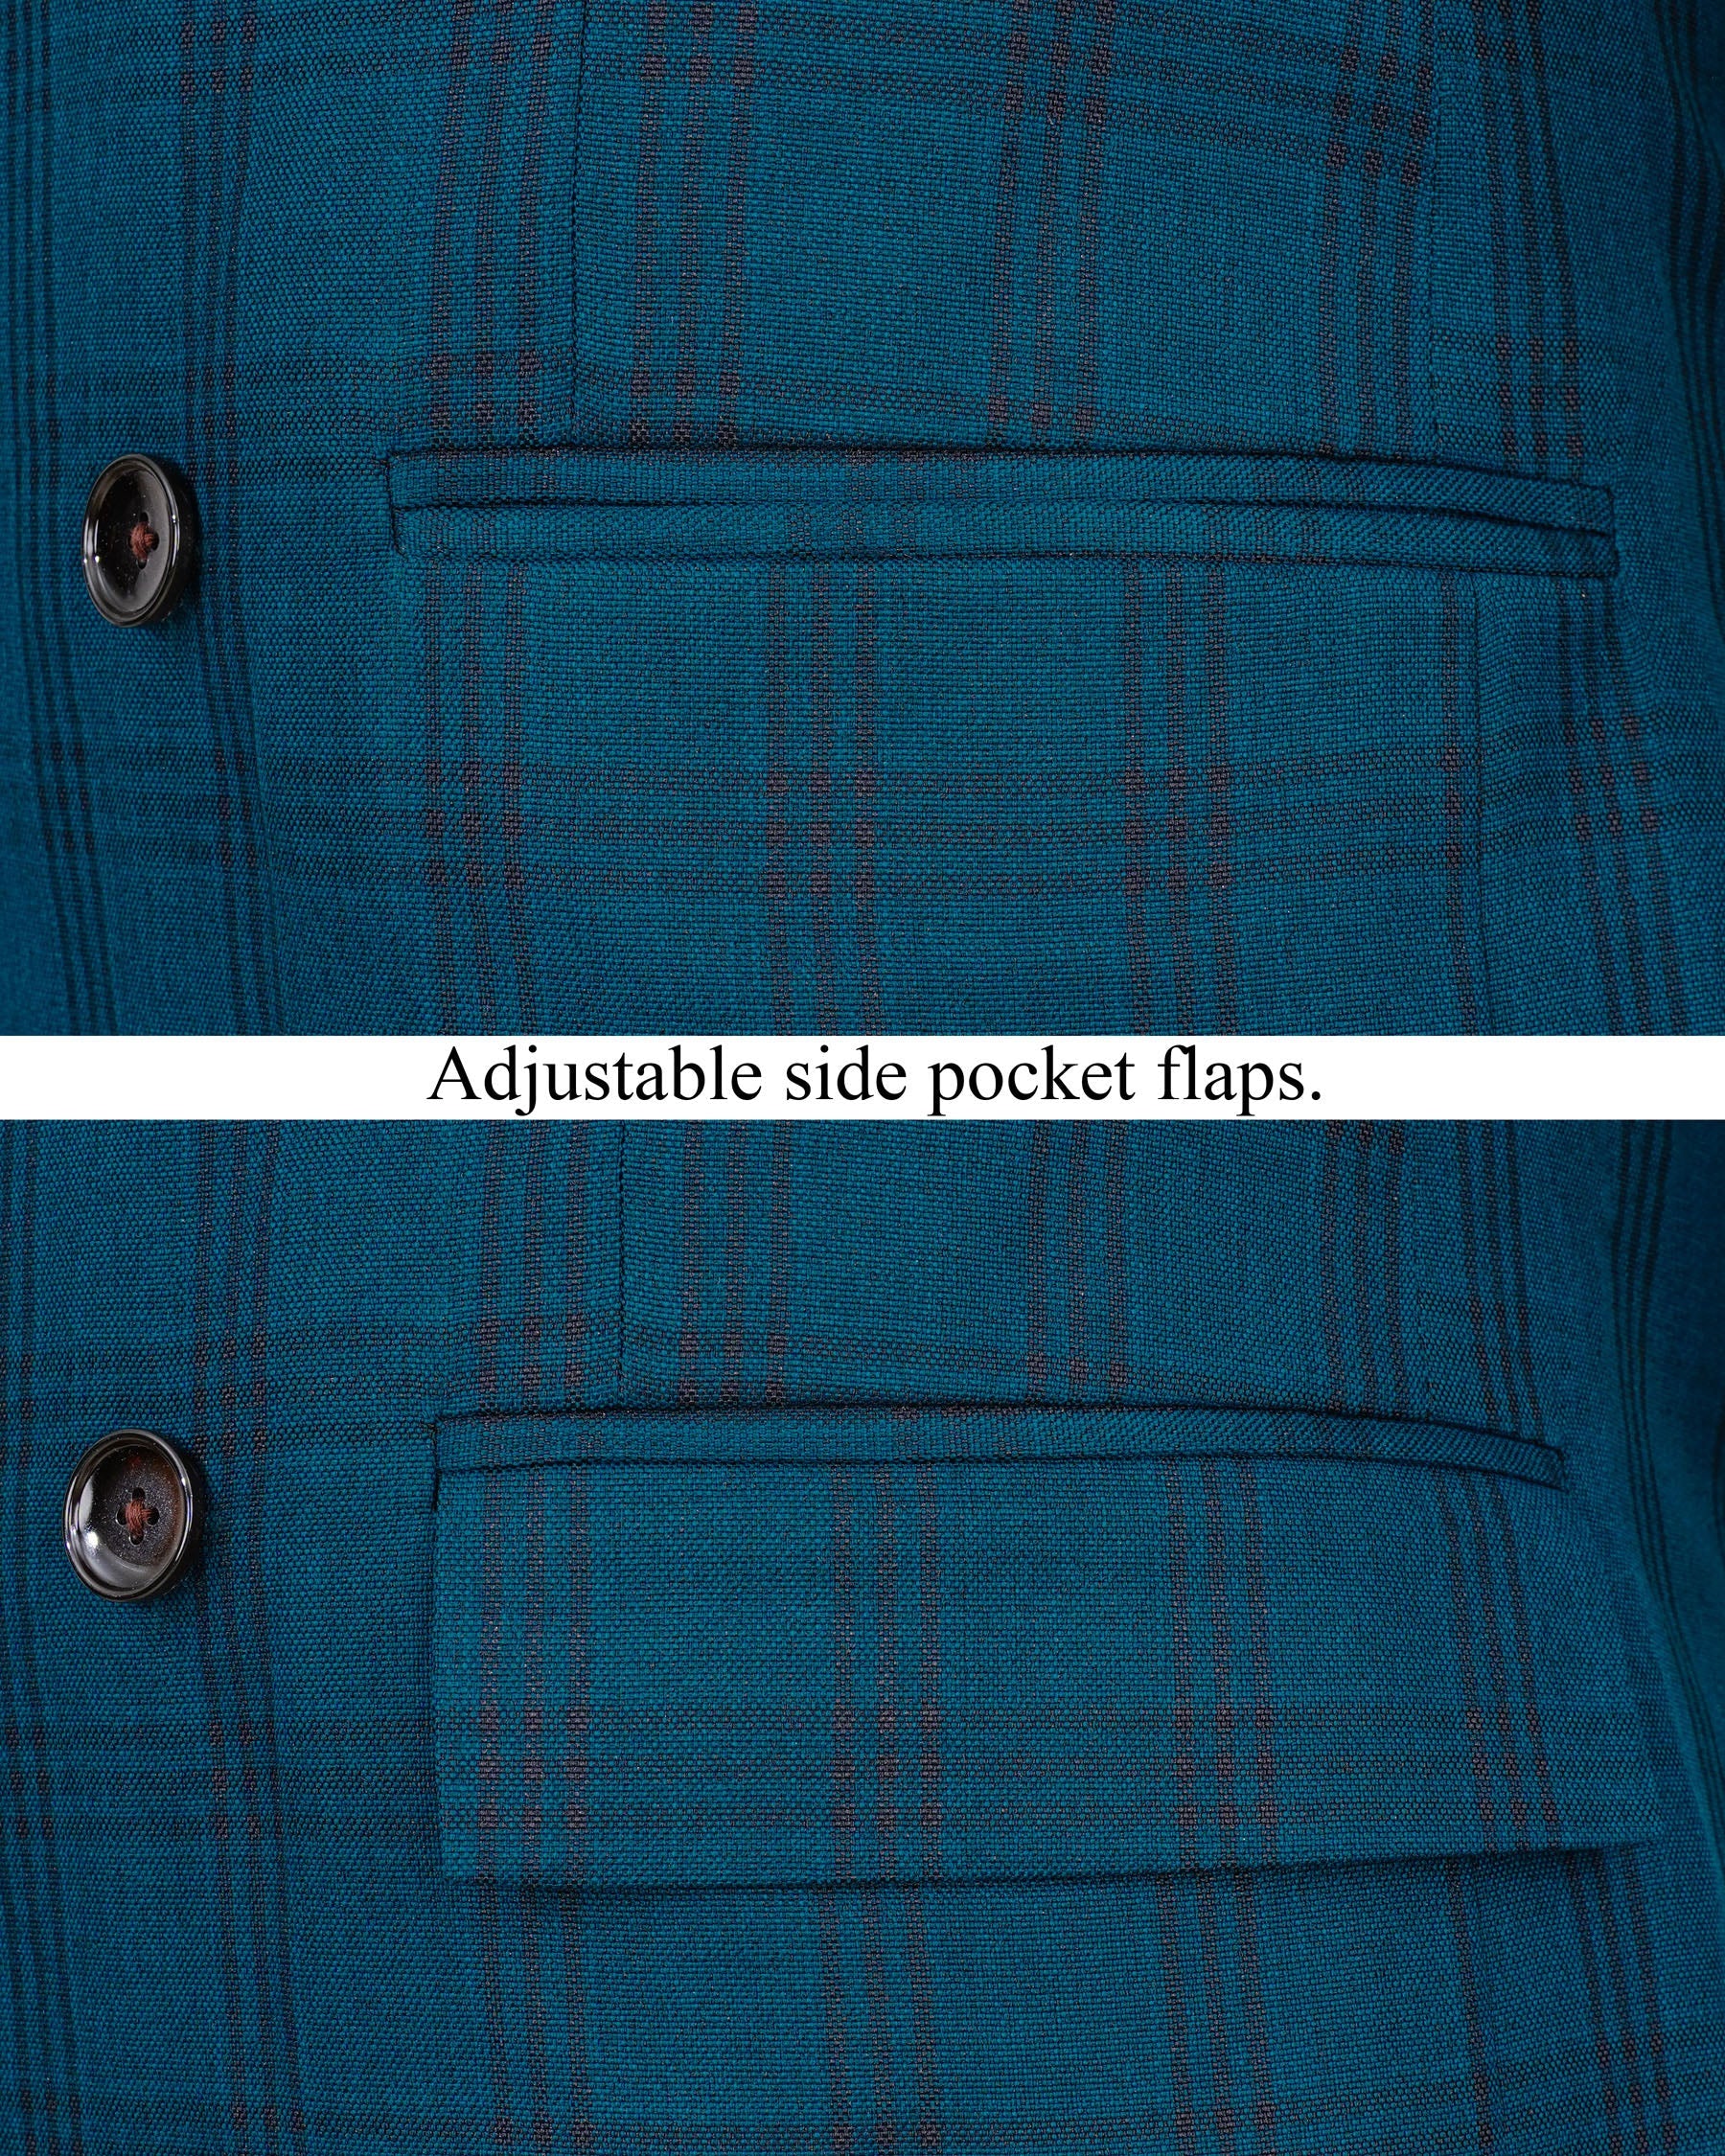 Sapphire Blue With Black Plaid Double Breasted Blazer BL1993-DB-36, BL1993-DB-38, BL1993-DB-40, BL1993-DB-42, BL1993-DB-44, BL1993-DB-46, BL1993-DB-48, BL1993-DB-50, BL1993-DB-52, BL1993-DB-54, BL1993-DB-56, BL1993-DB-58, BL1993-DB-60